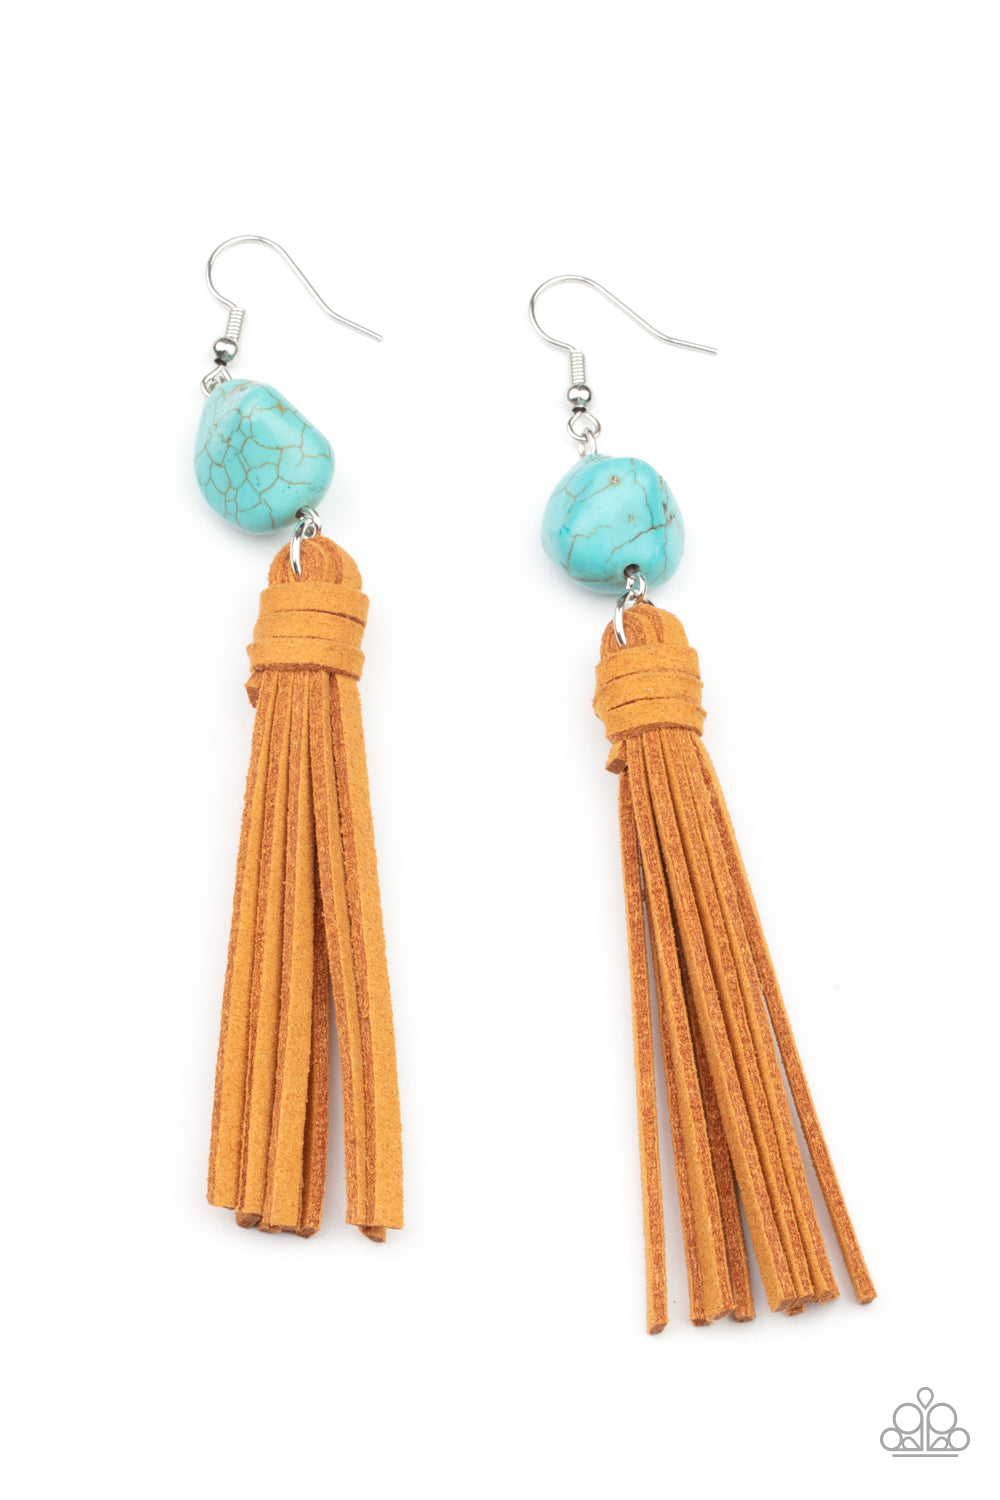 All-Natural Allure - Blue earring 2196